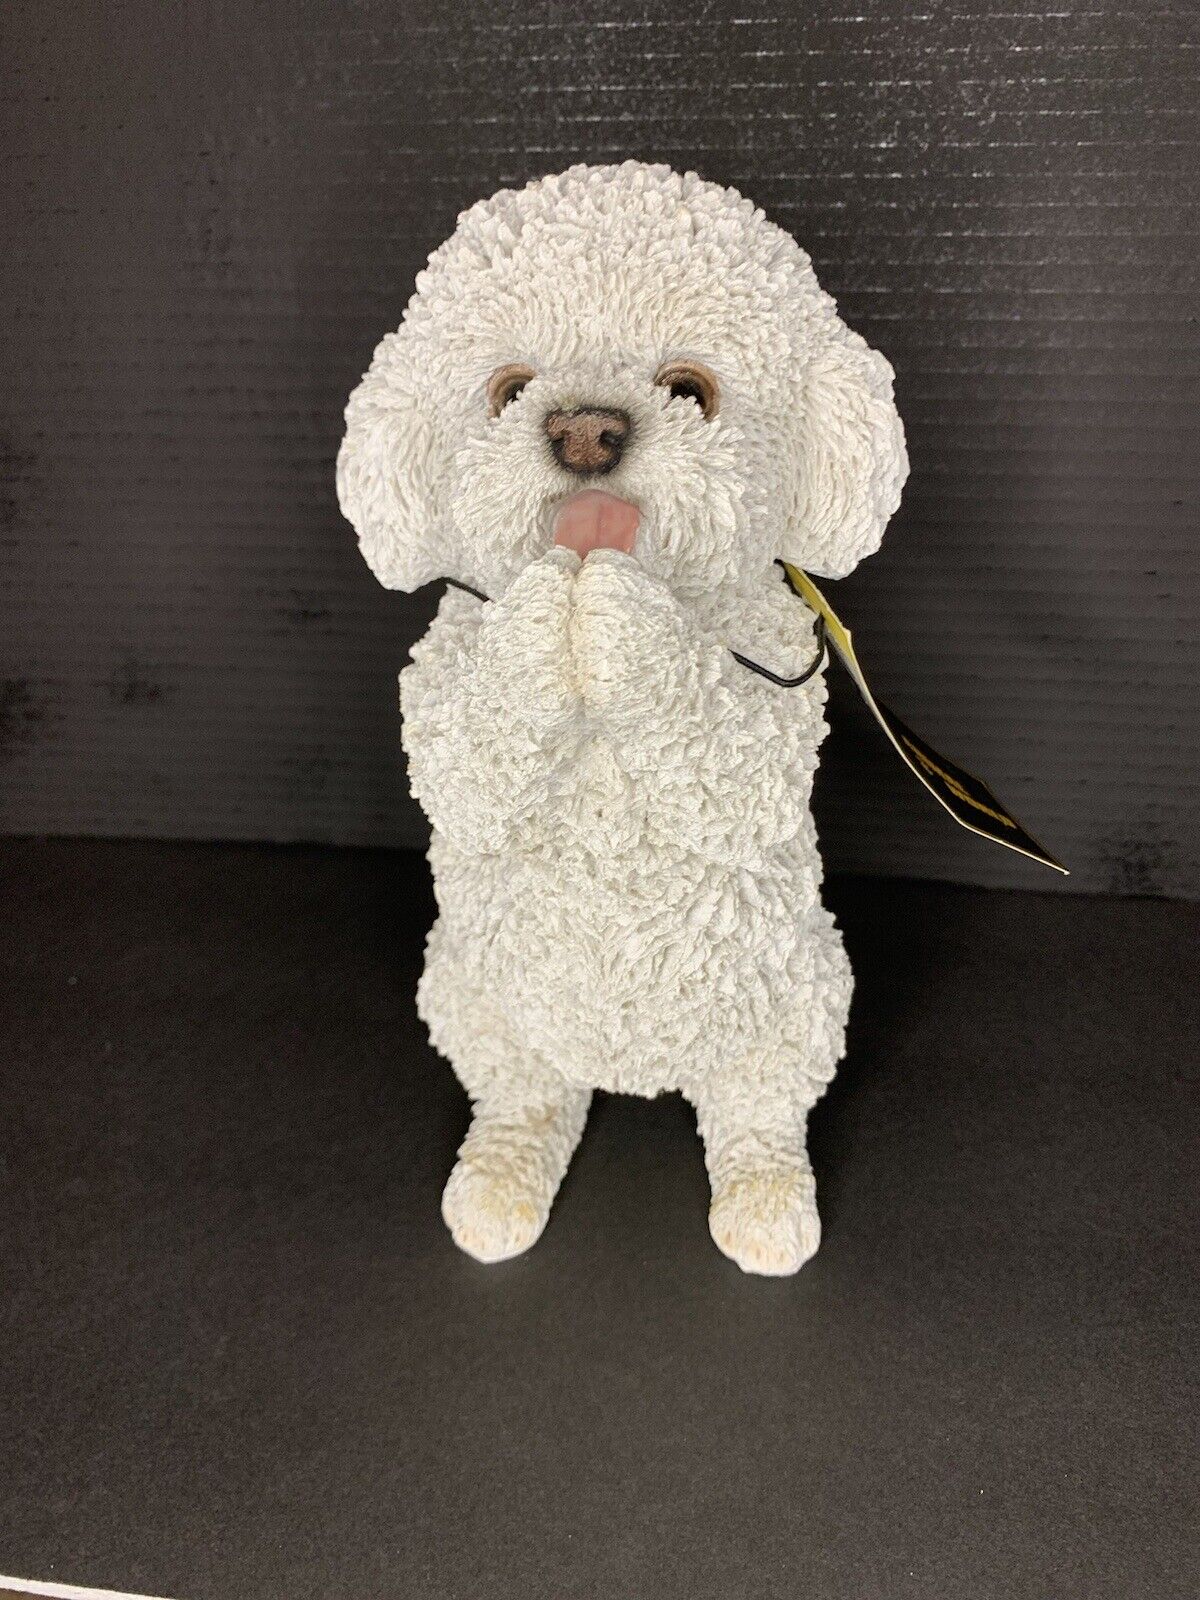 Poodle/Doodle Statue White .New with Tags. Animal World .